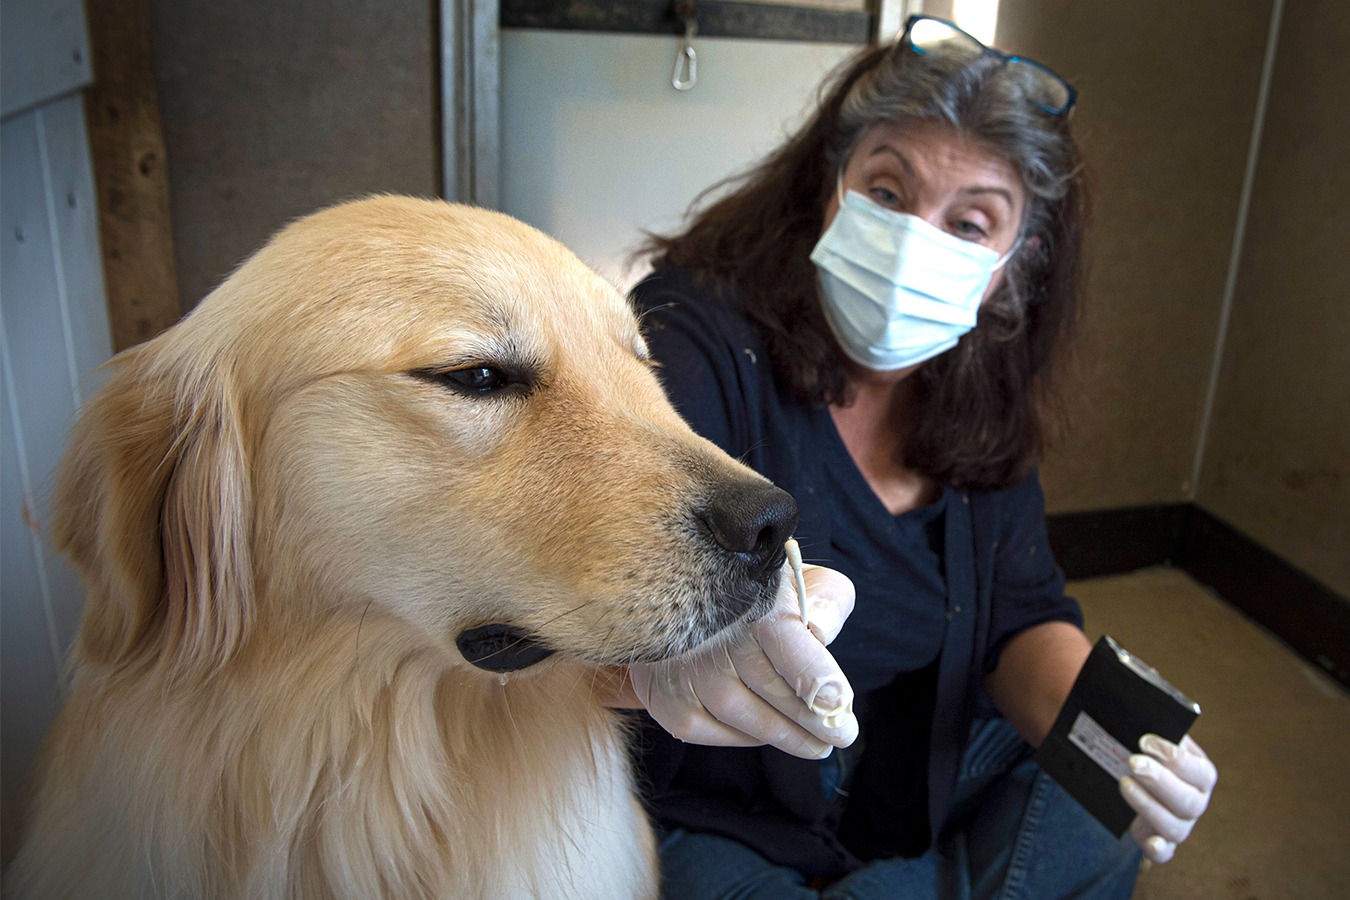 Jennifer Arnold holds a scented cotton swab to Cheeto's nose as a part of the dog's training.